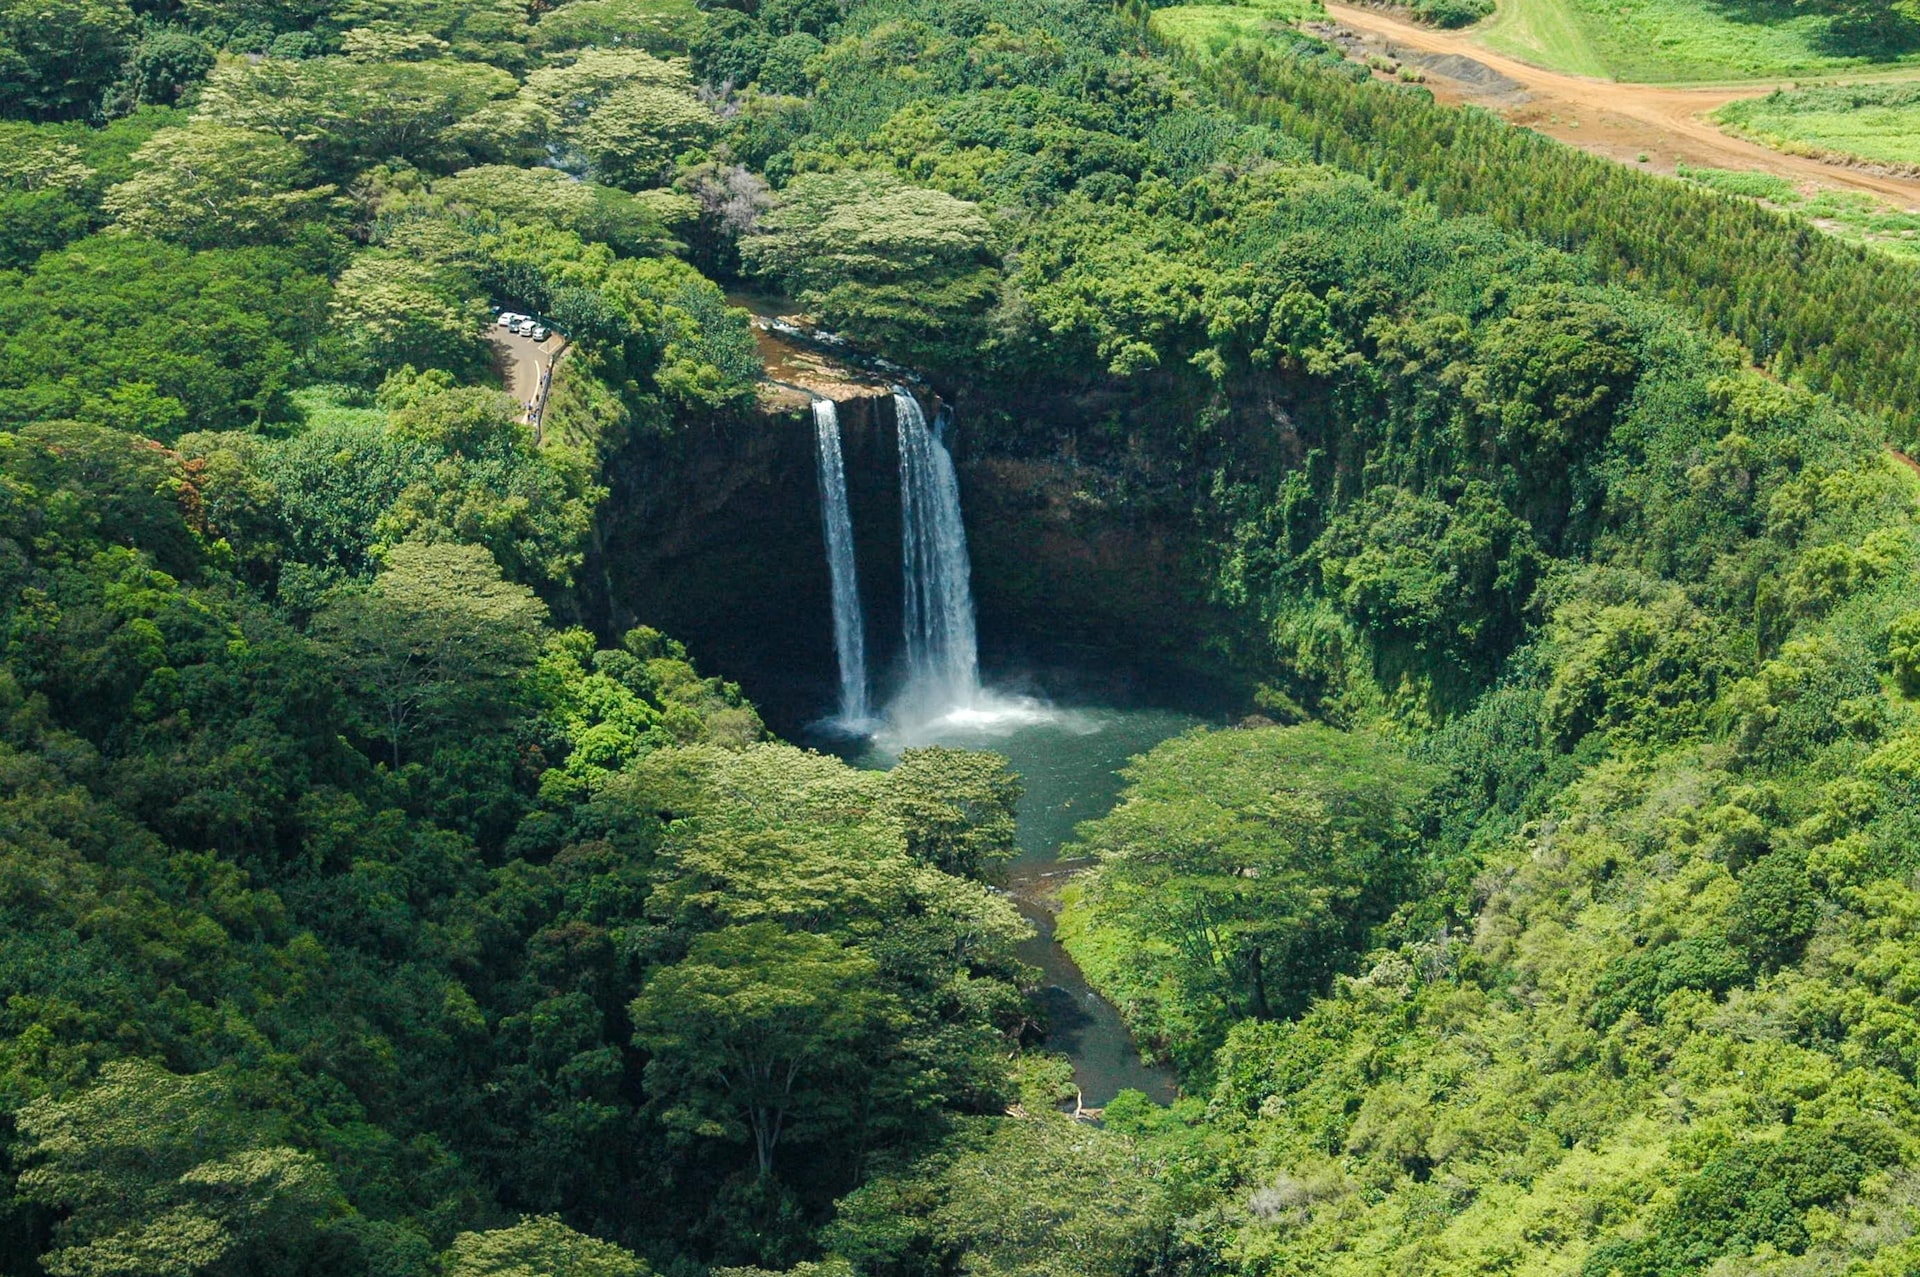 Waterfall view from a helicopter on the island of Kauai.